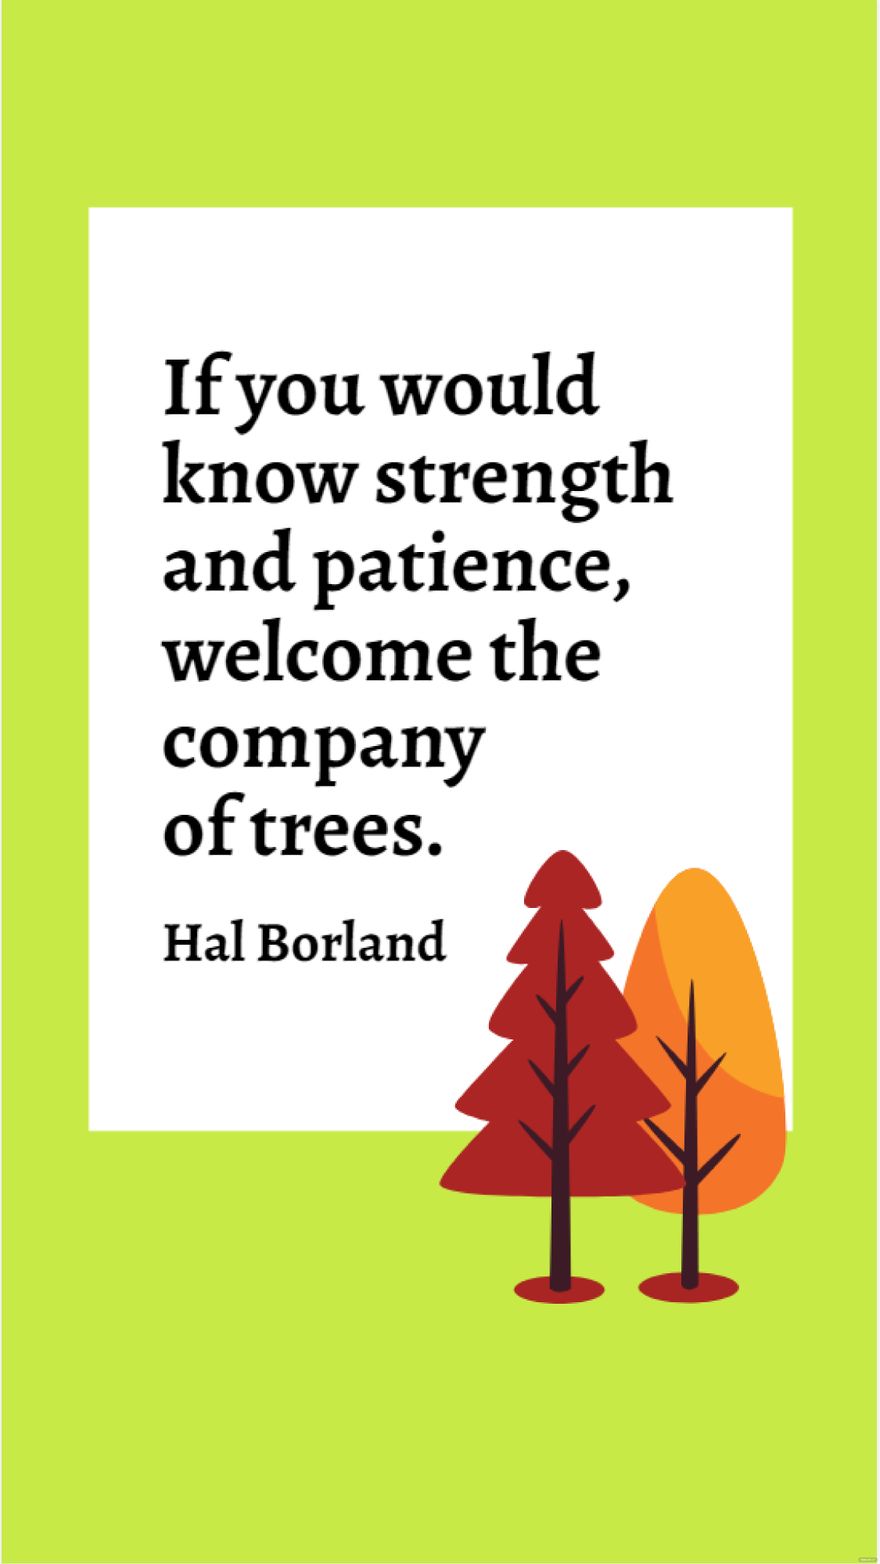 Free Hal Borland - If you would know strength and patience, welcome the company of trees. in JPG